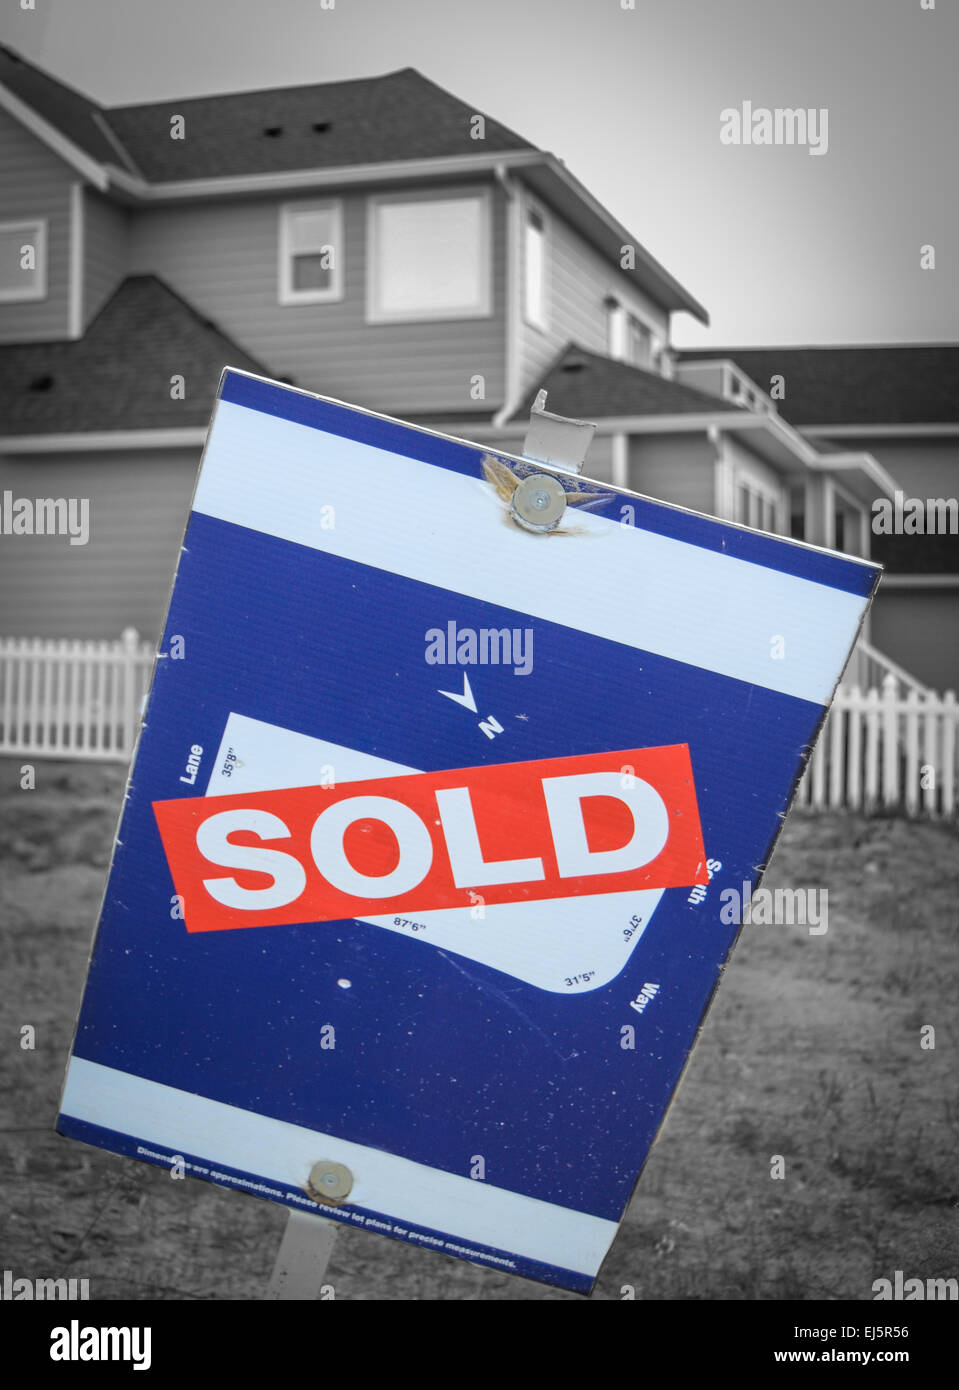 Real Estate Image Of A Sold Sign Beside A New Built Home Stock Photo